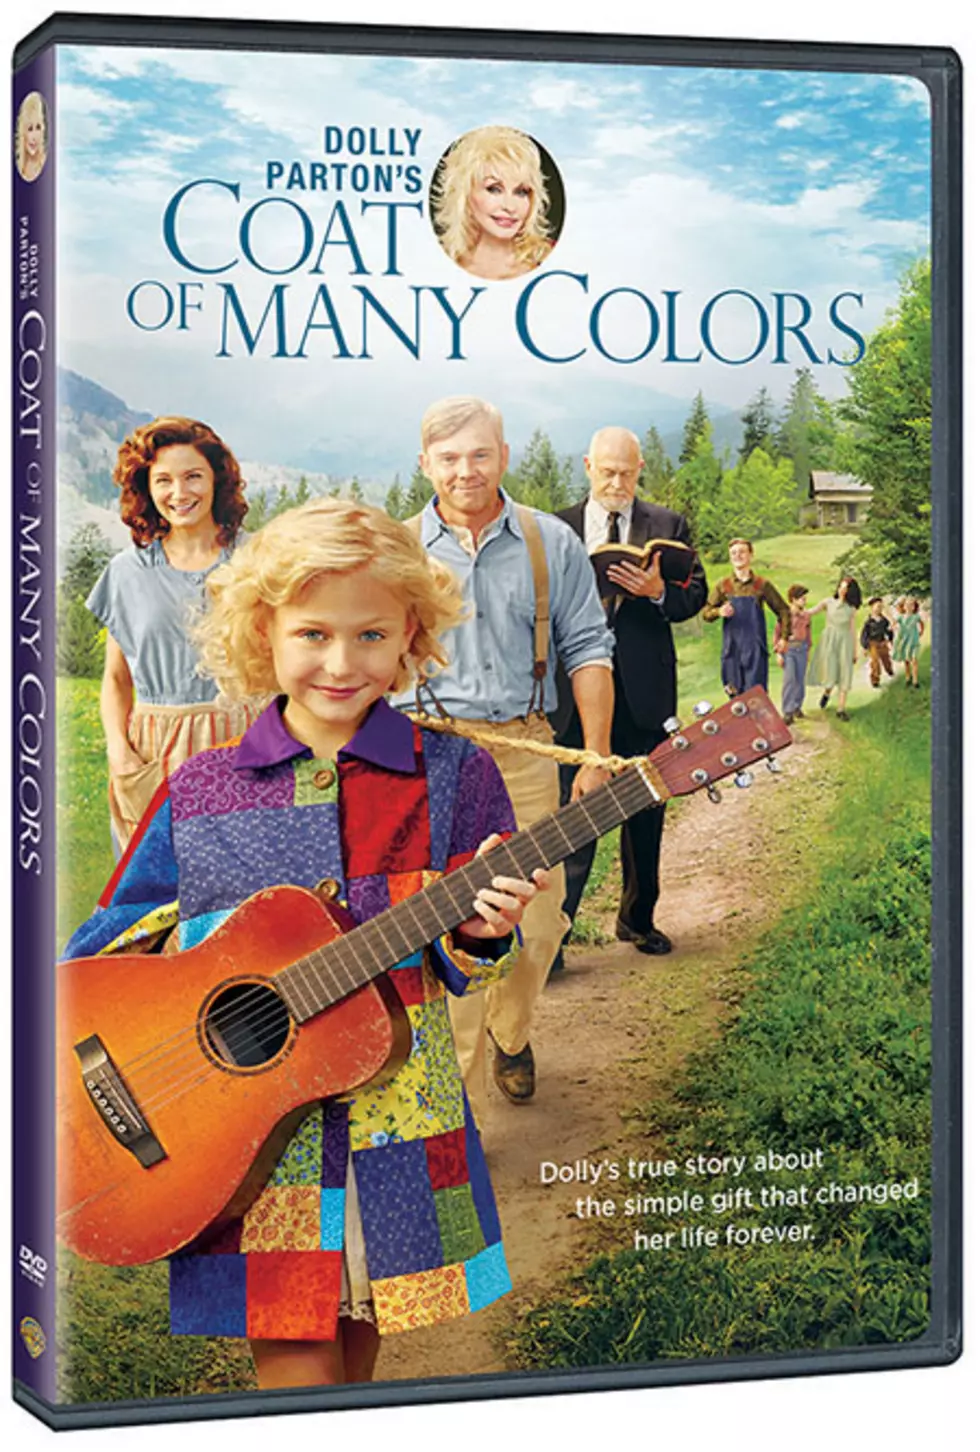 Dolly’s “Coat of Many Colors” Coming to DVD